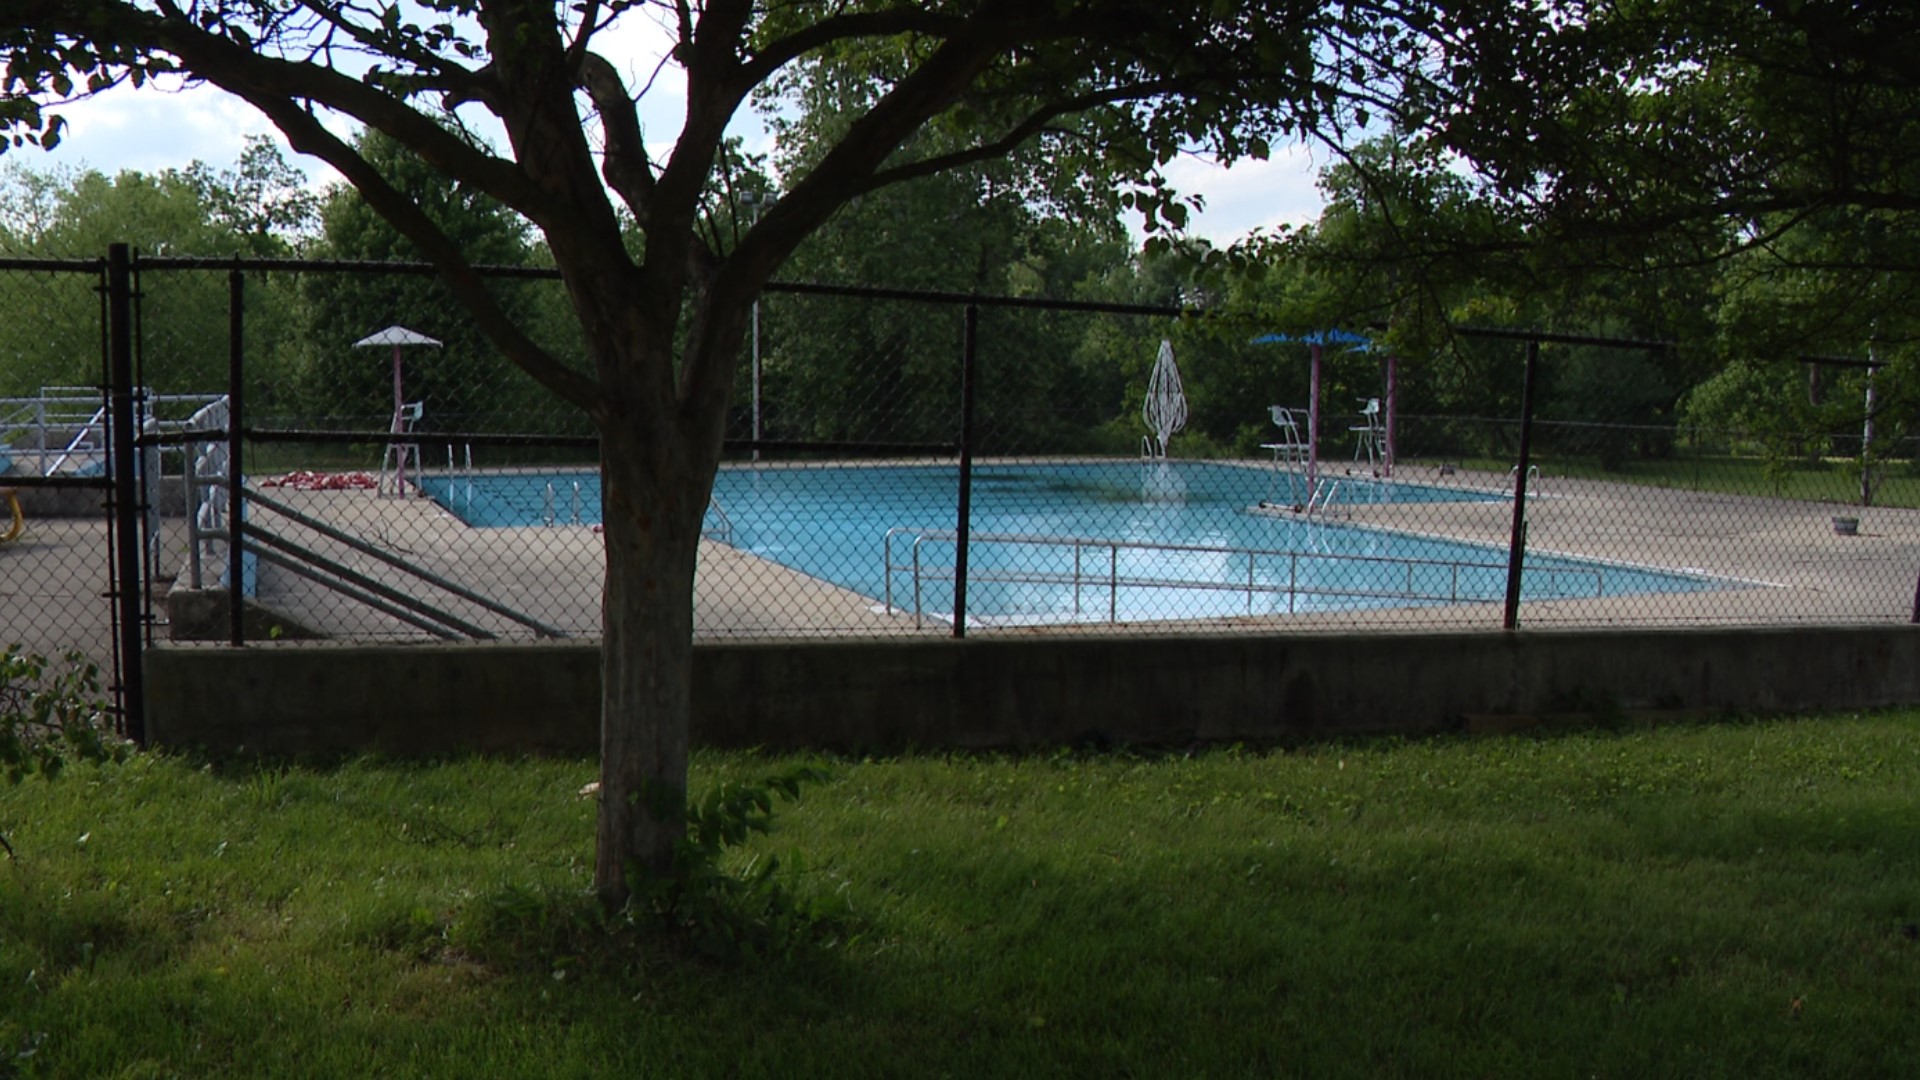 Indy Parks has opened six of the city's 17 public swimming pools, but Broad Ripple Park is not one of them.